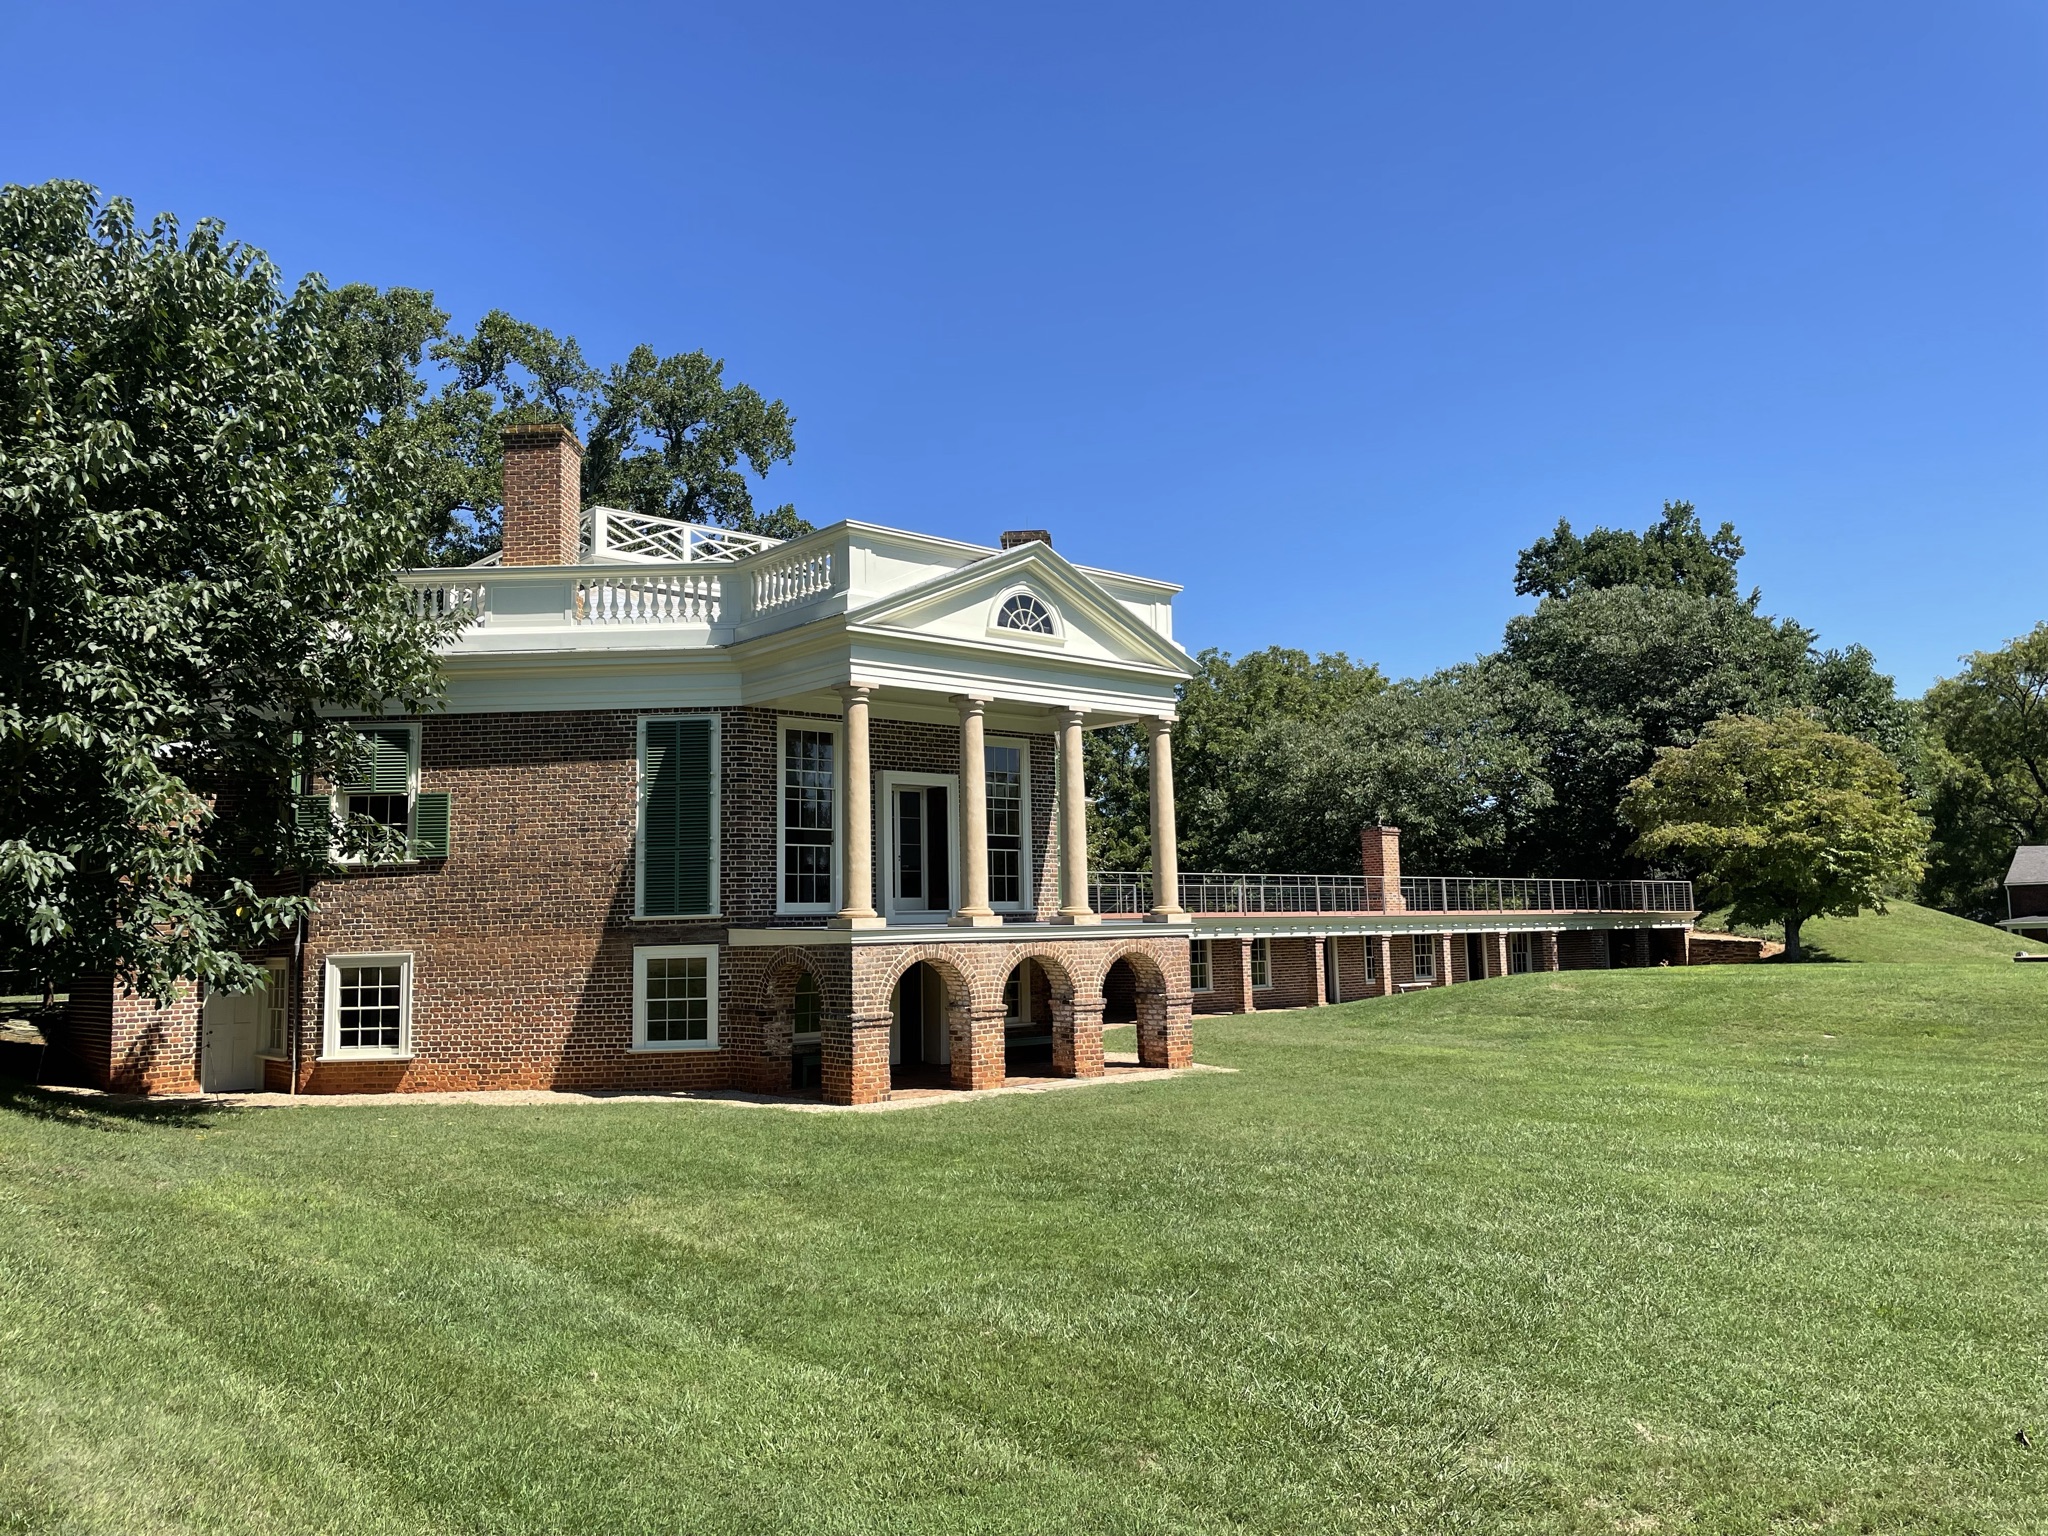 Touring Poplar Forest in Forest, VA - Thomas Jefferson's Summer Home